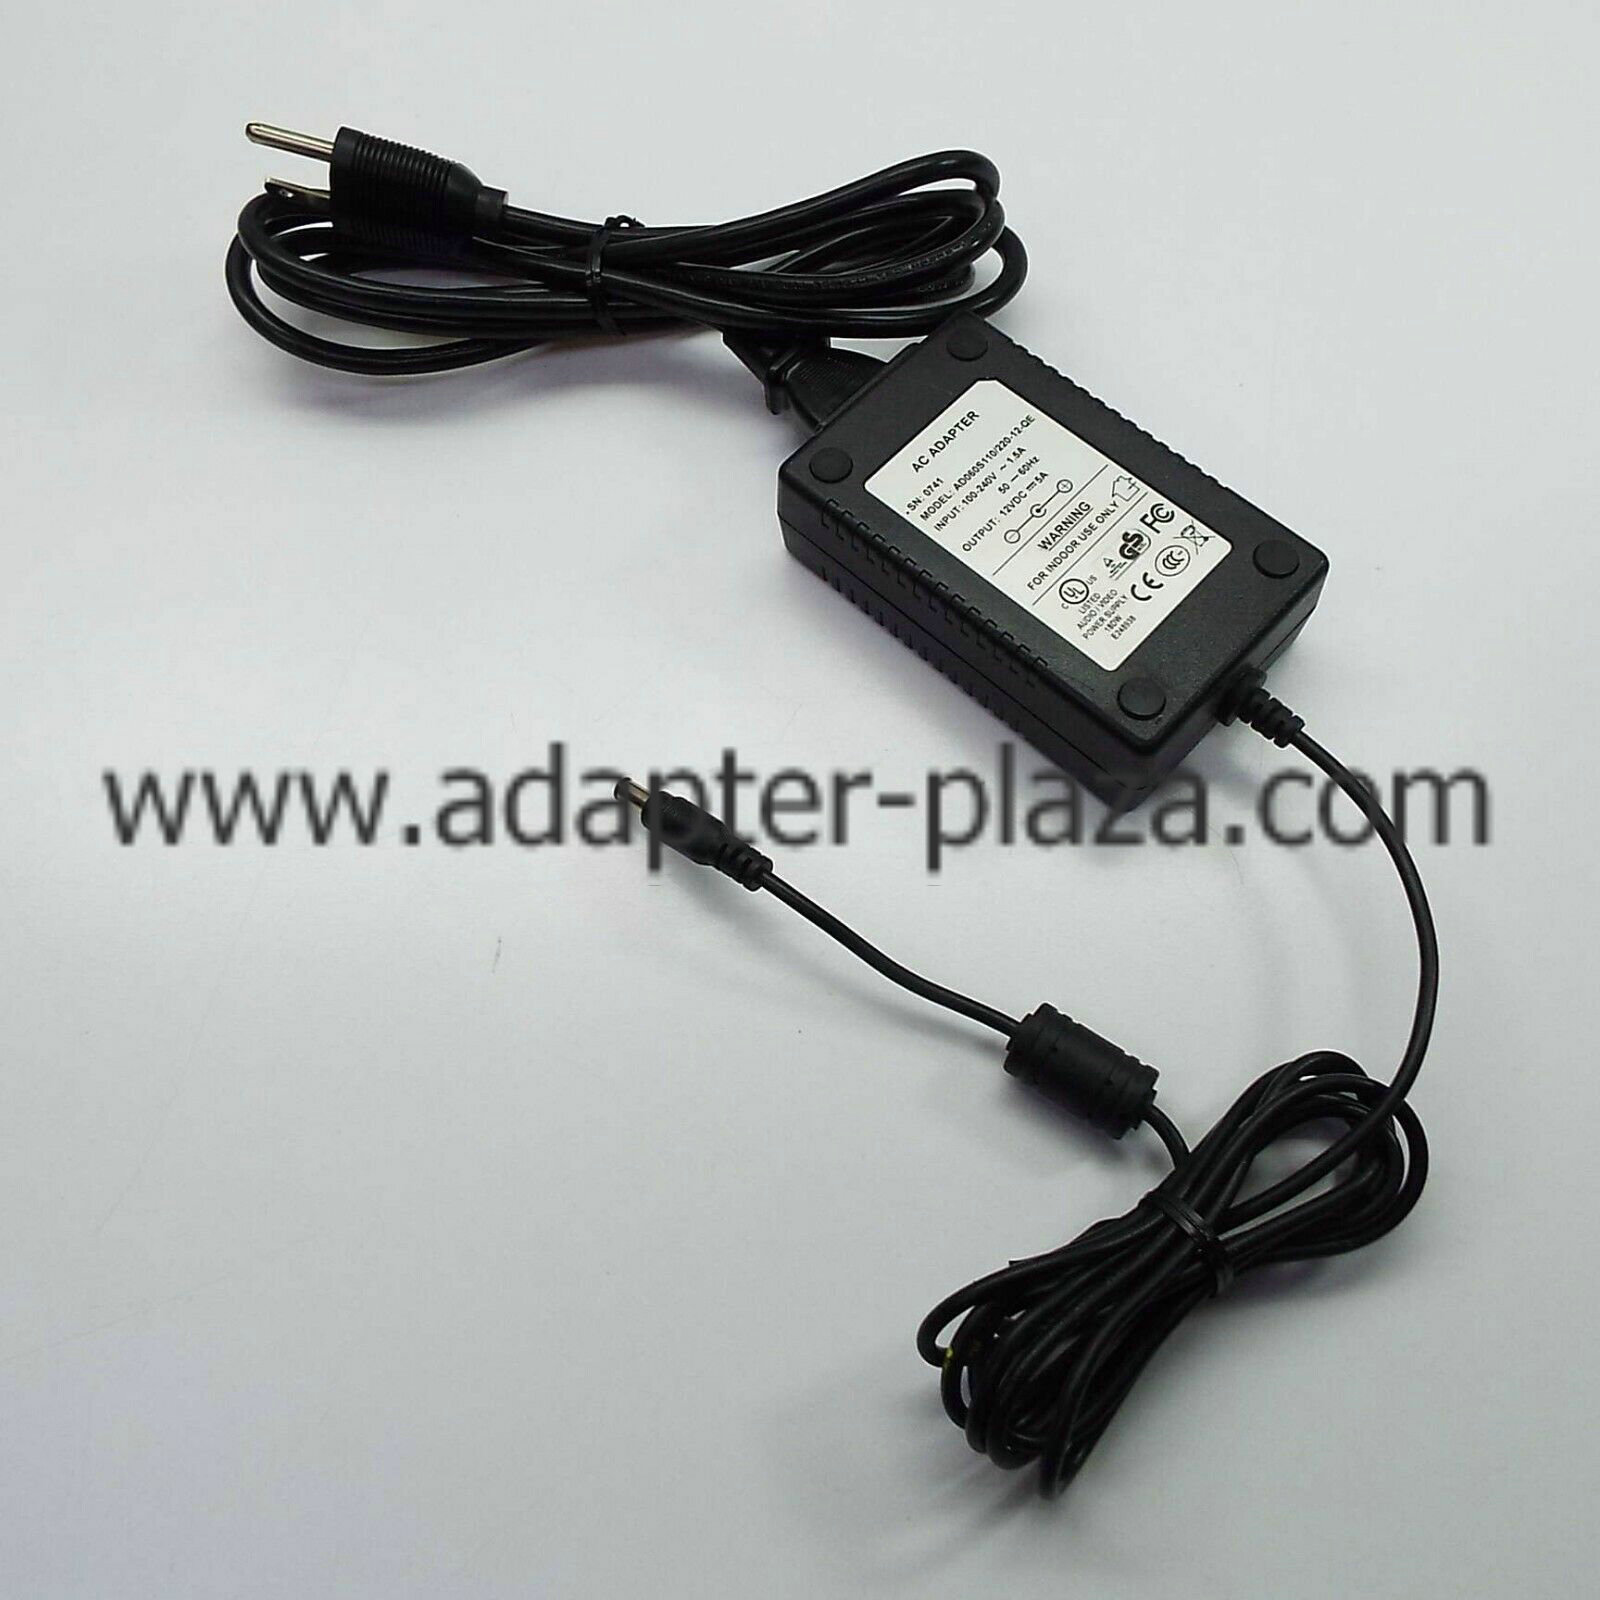 *Brand NEW* AD060S110/220-12-QE 12VDC 5A AC DC Adapter POWER SUPPLY